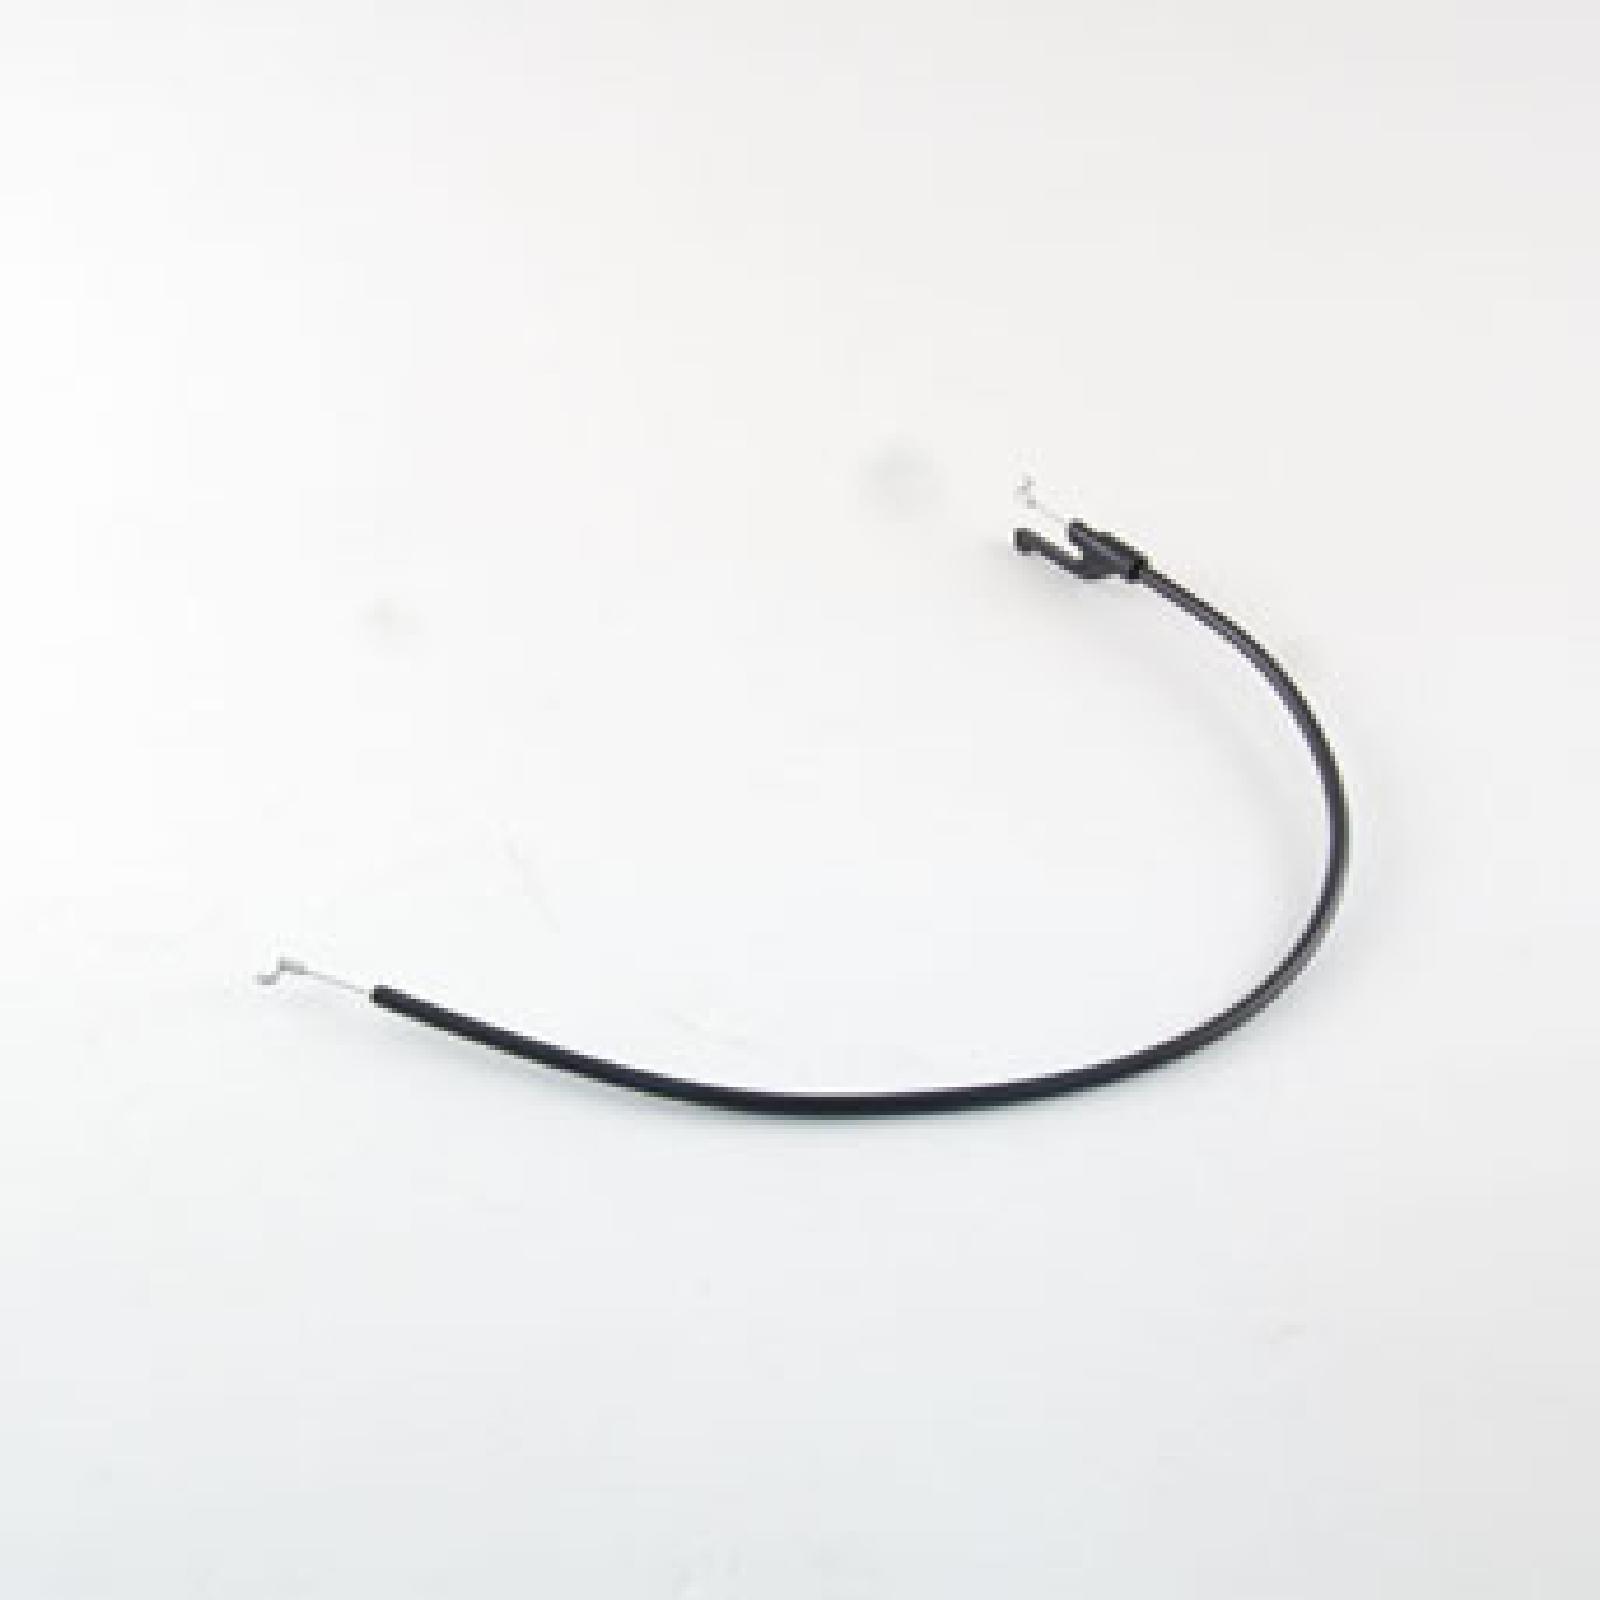 CABLE THROTTLE part# 74604085A by MTD